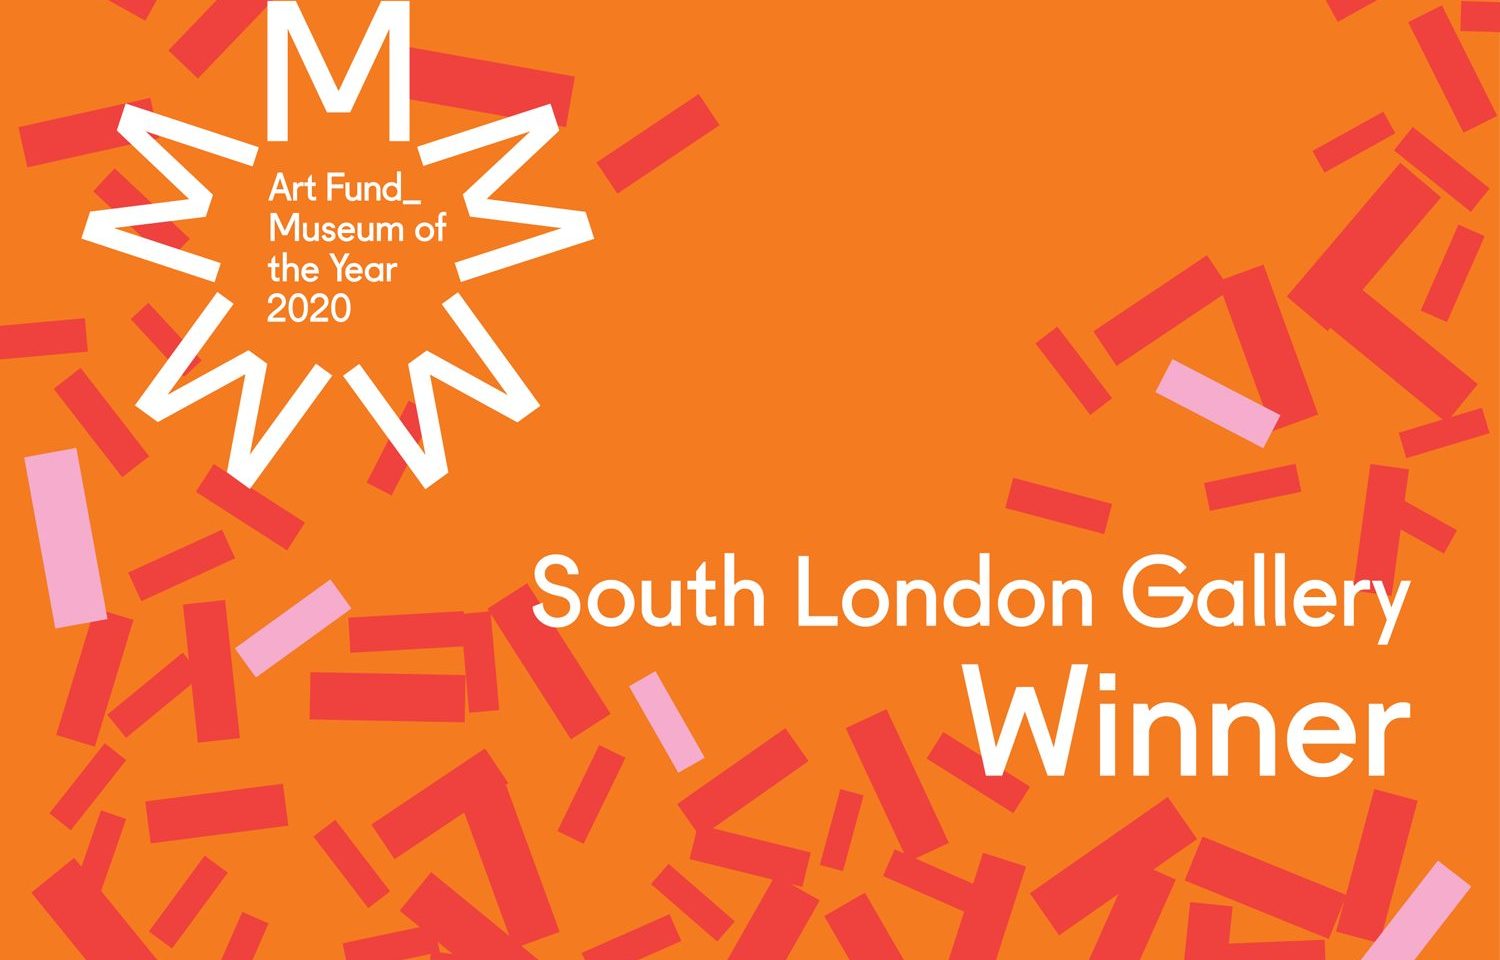 Art Fund Museum of the Year South London Gallery Winner graphic with confetti